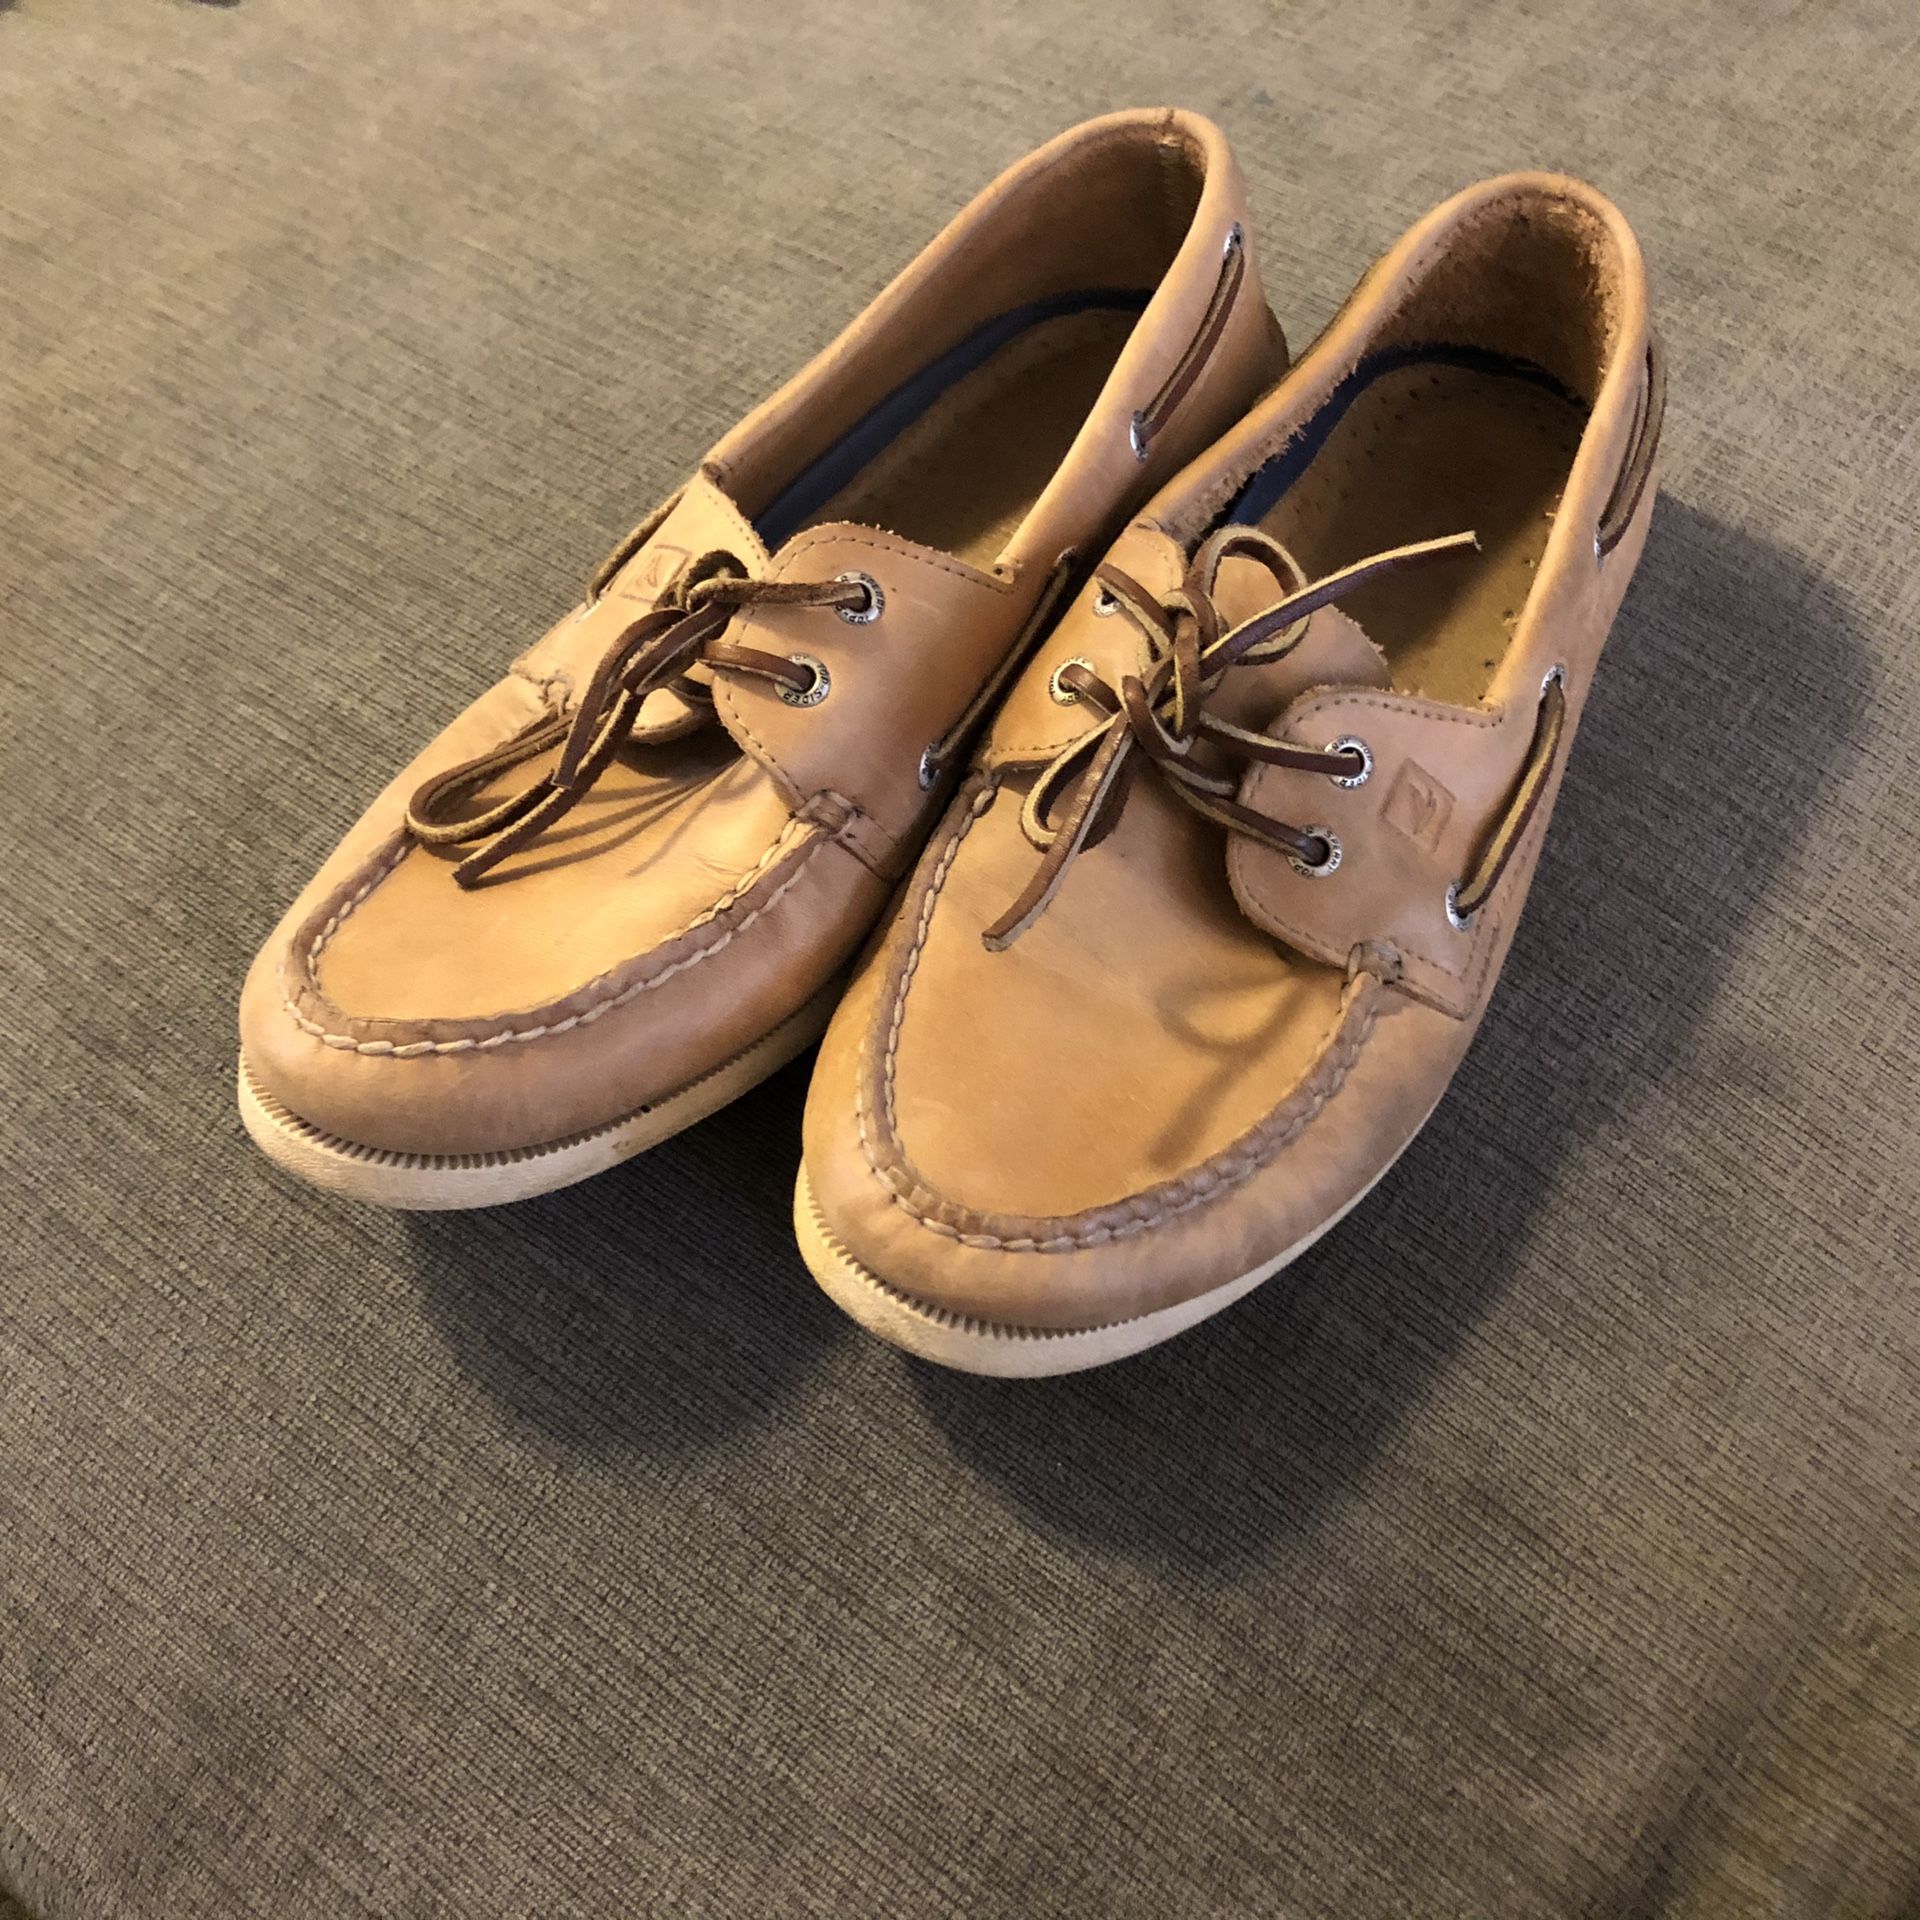 Sperry Top-spider shoes. Size 10 men’s